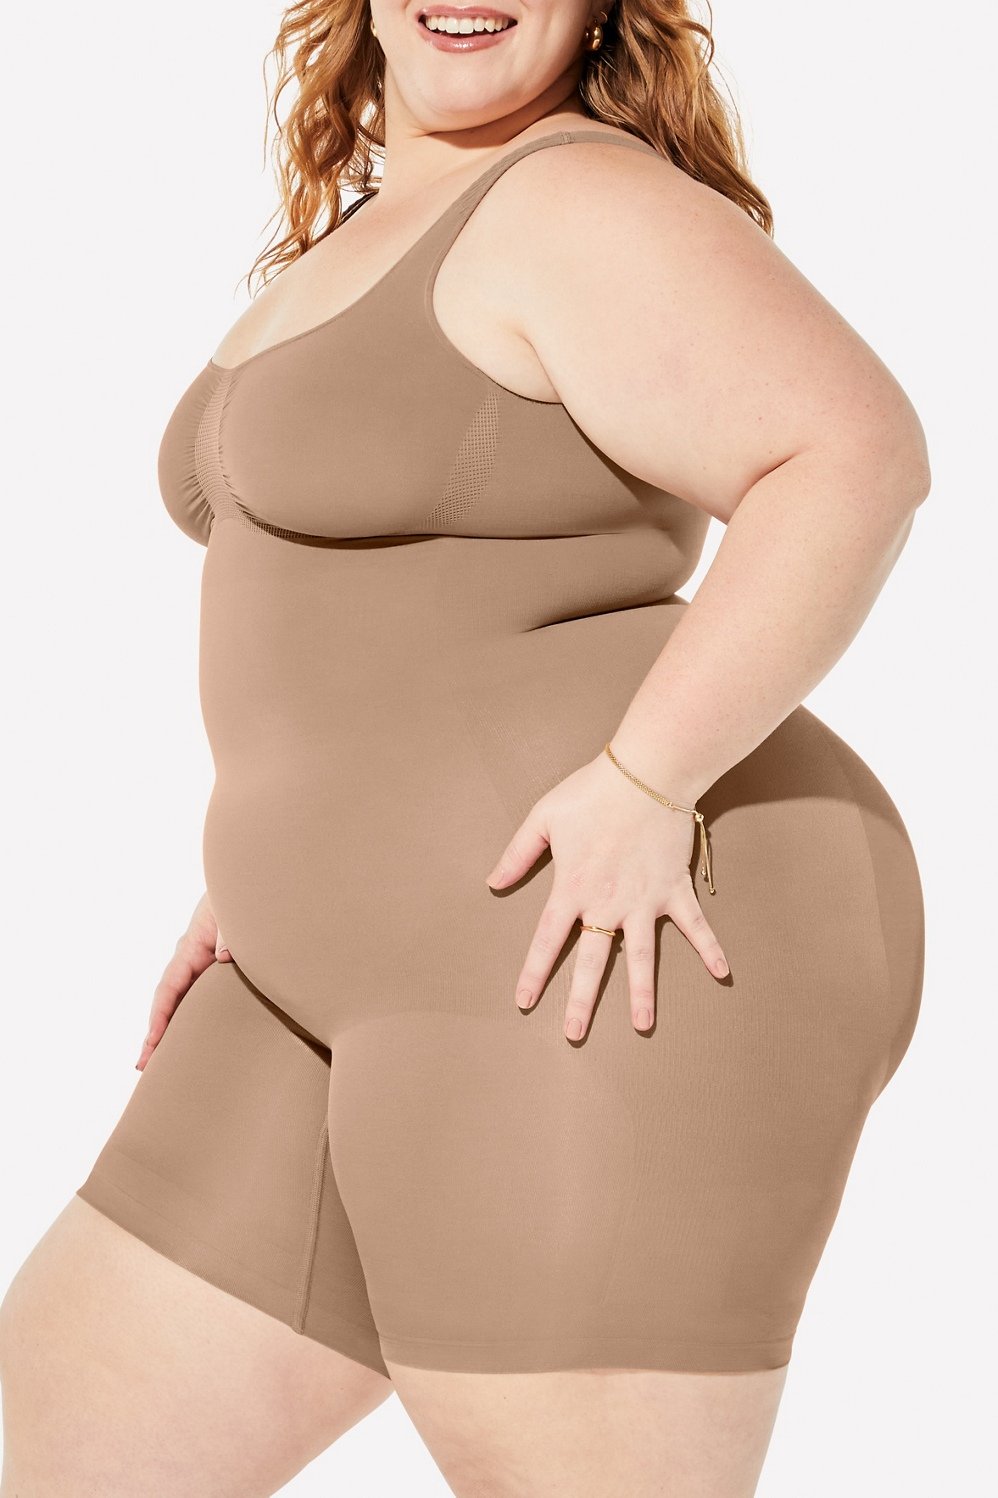 Get ready for your closeup! NEW @Yitty Nearly Naked styles are